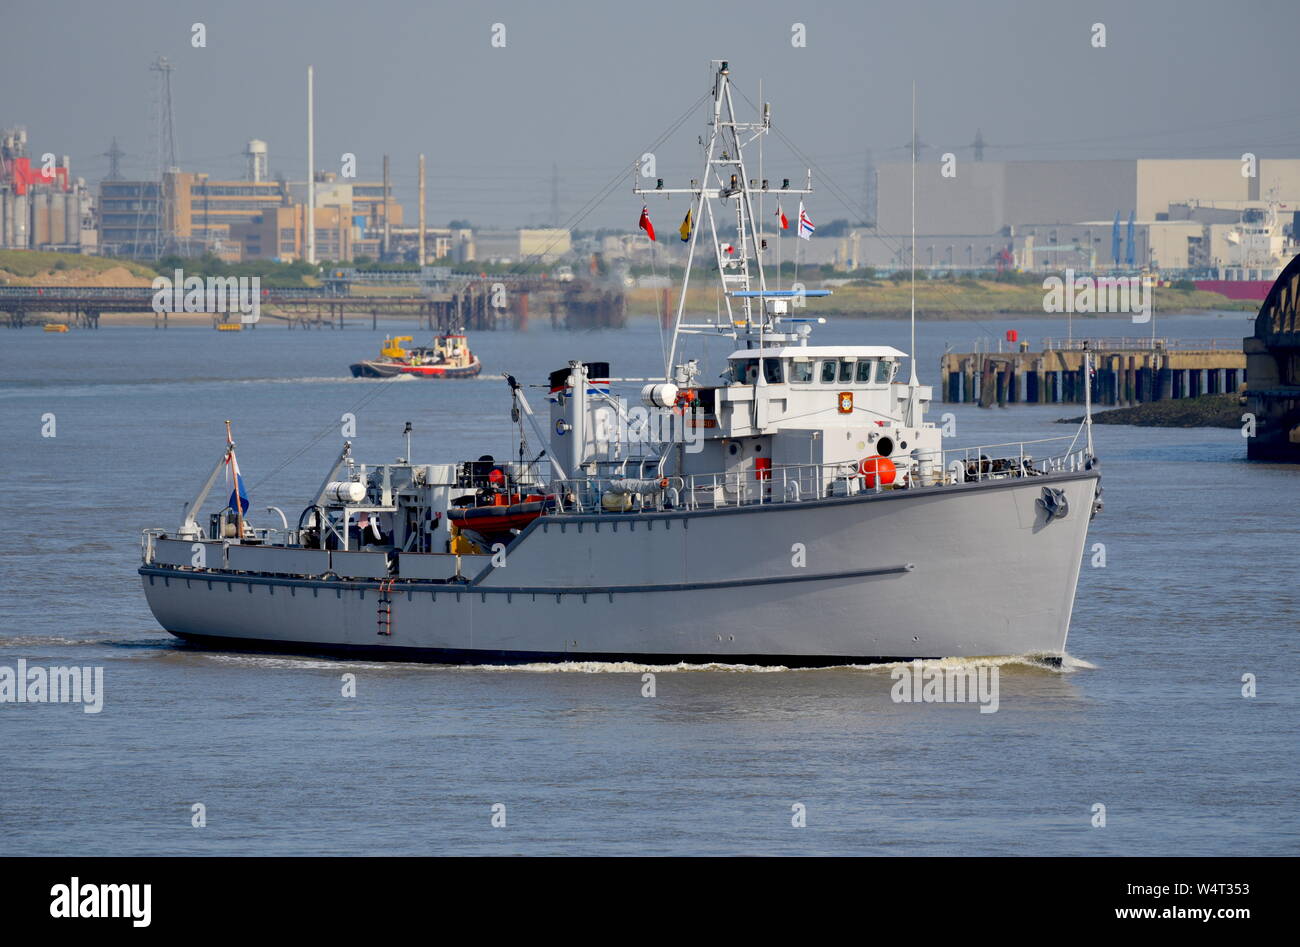 Sittard is a former Royal Netherlands Navy minesweeper used by the Sea Cadet Corps as a training ship. She appeared in the 2017 film 'Dunkirk'. Stock Photo